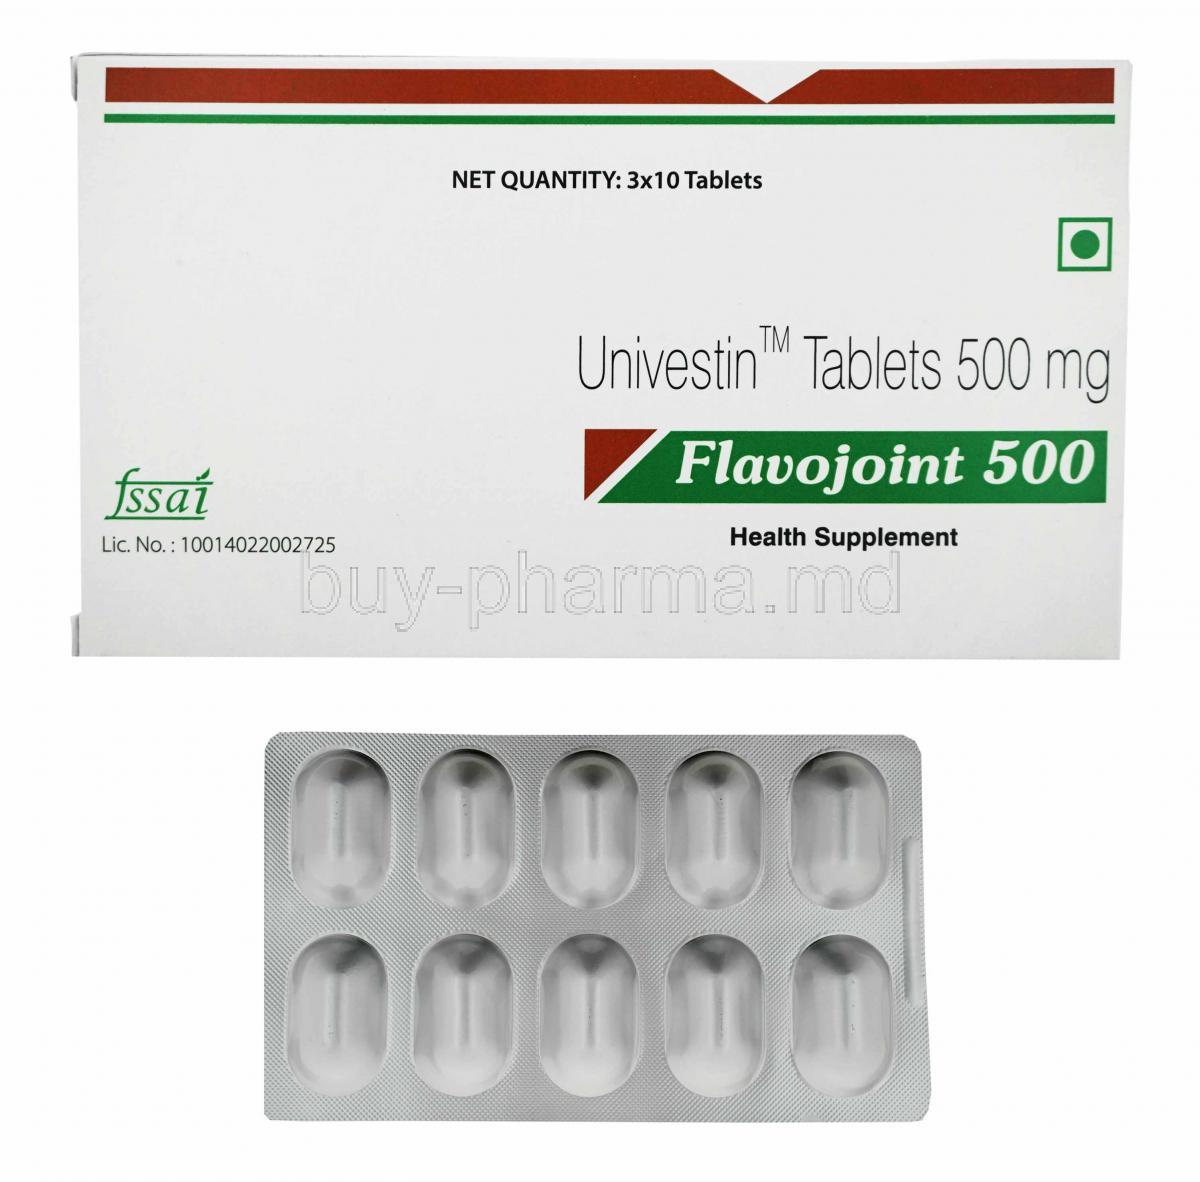 Flavojoint, Univestin 500mg box and tablets